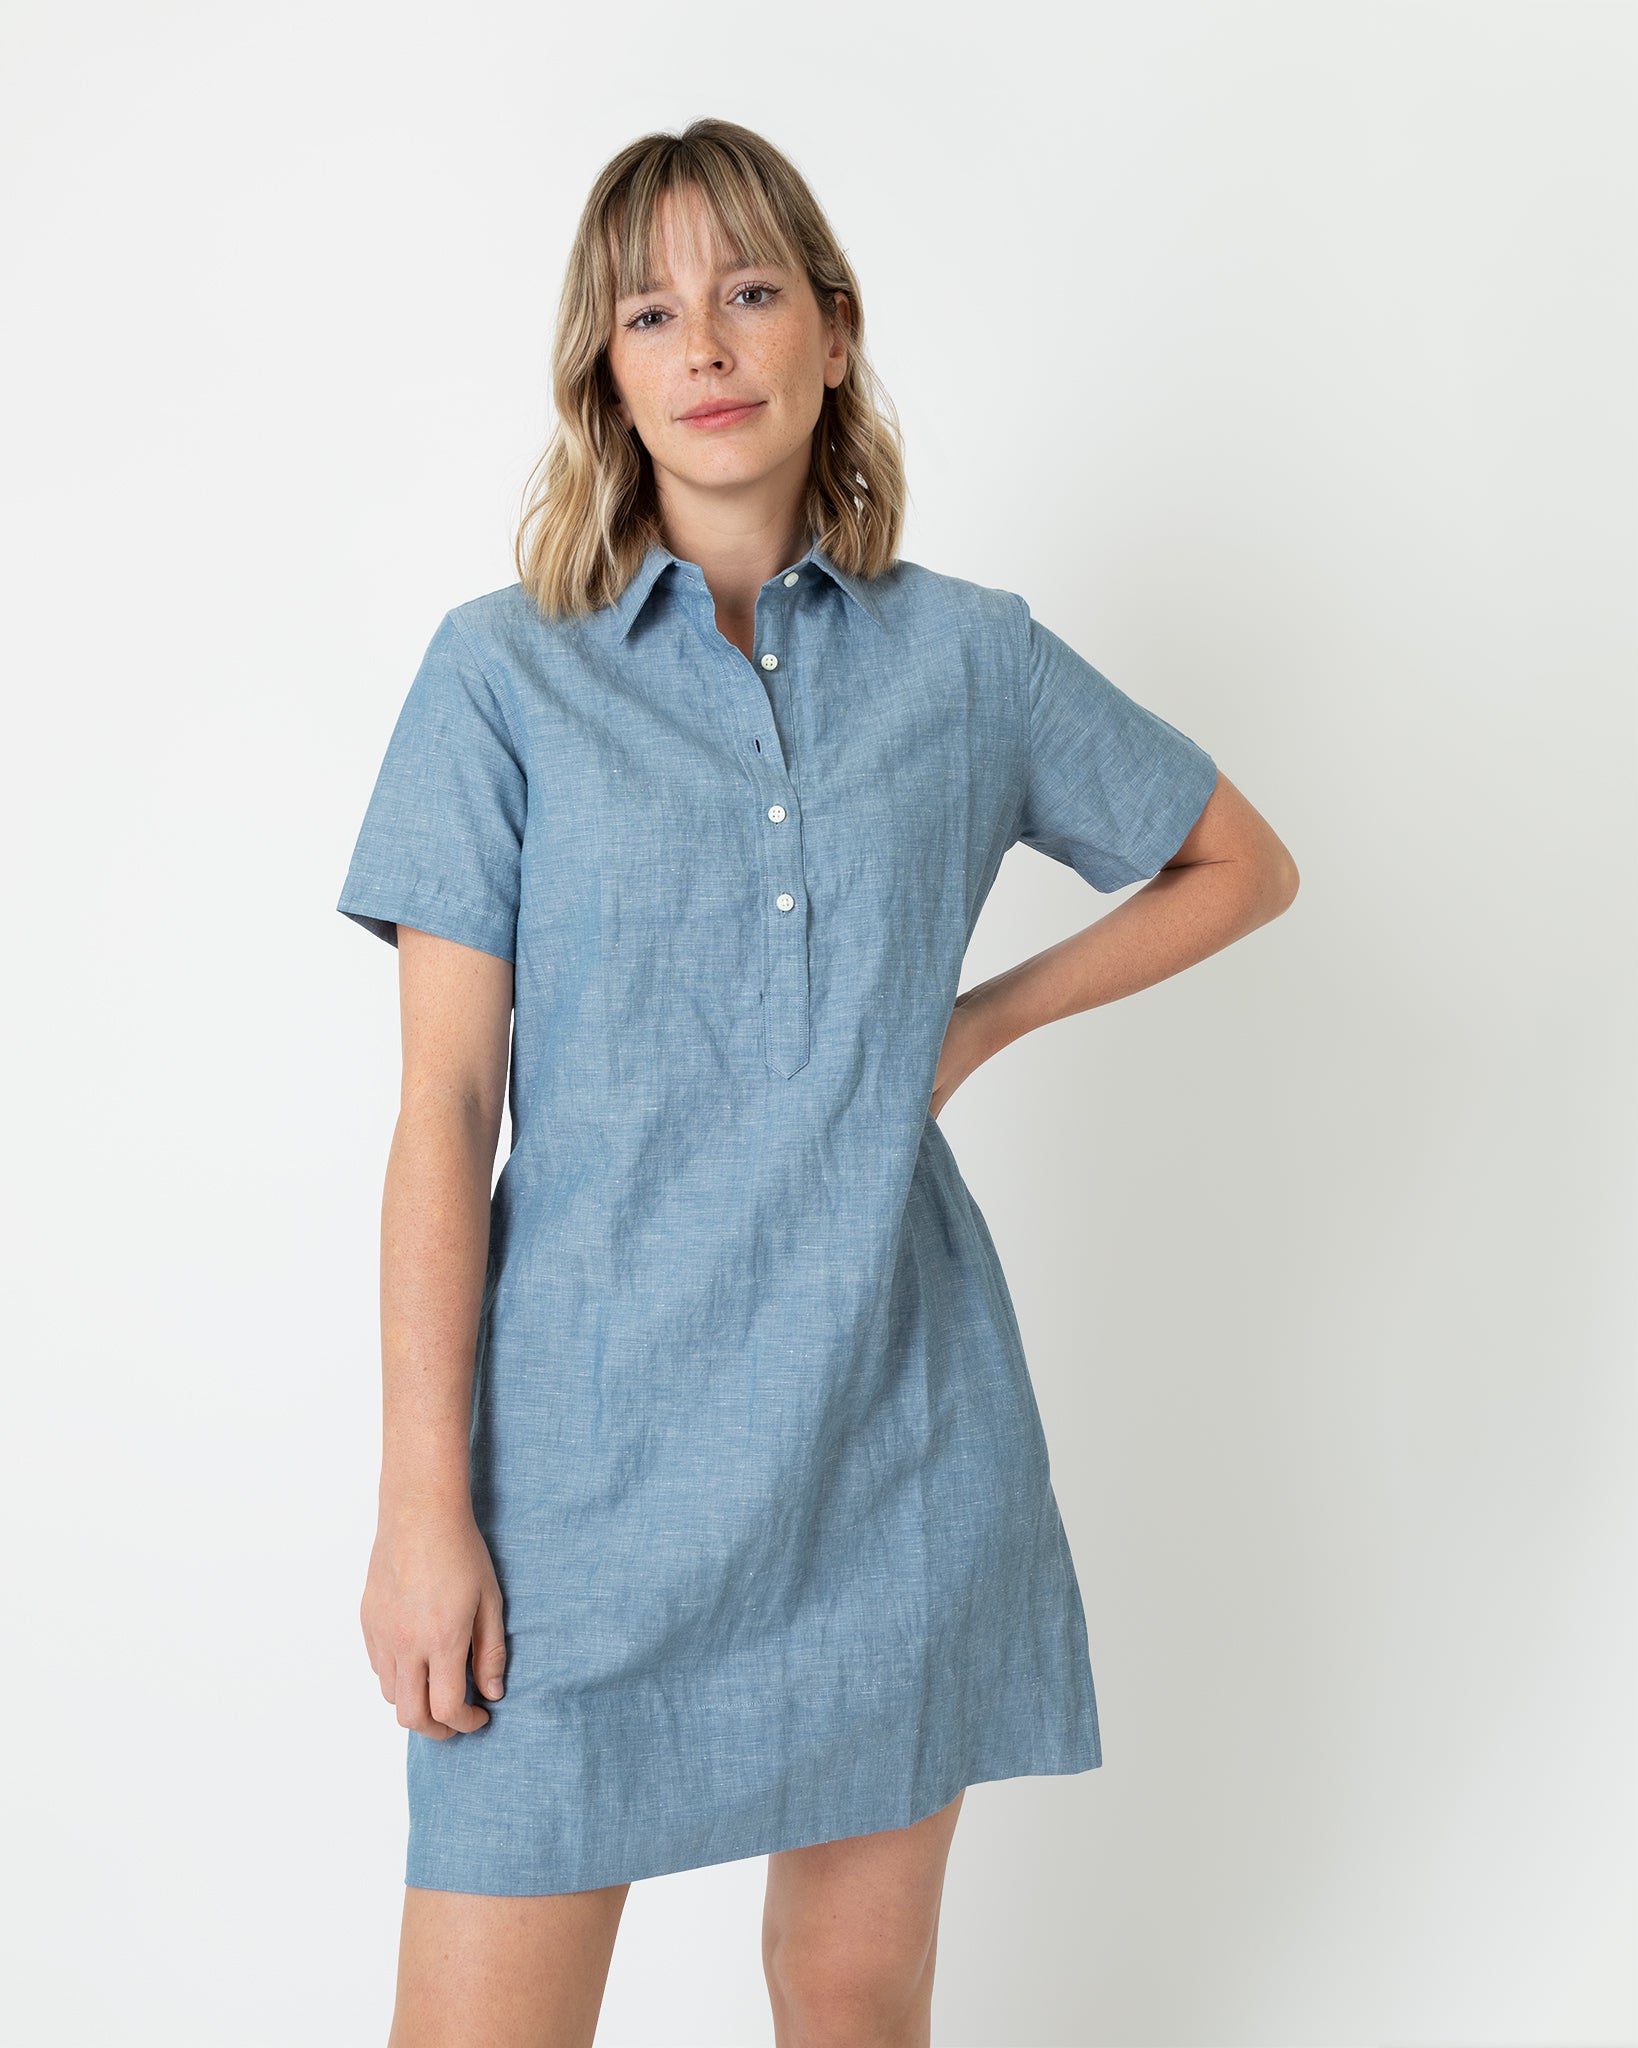 Short-Sleeved Popover Dress in Extra Light Washed Cotolino Chambray